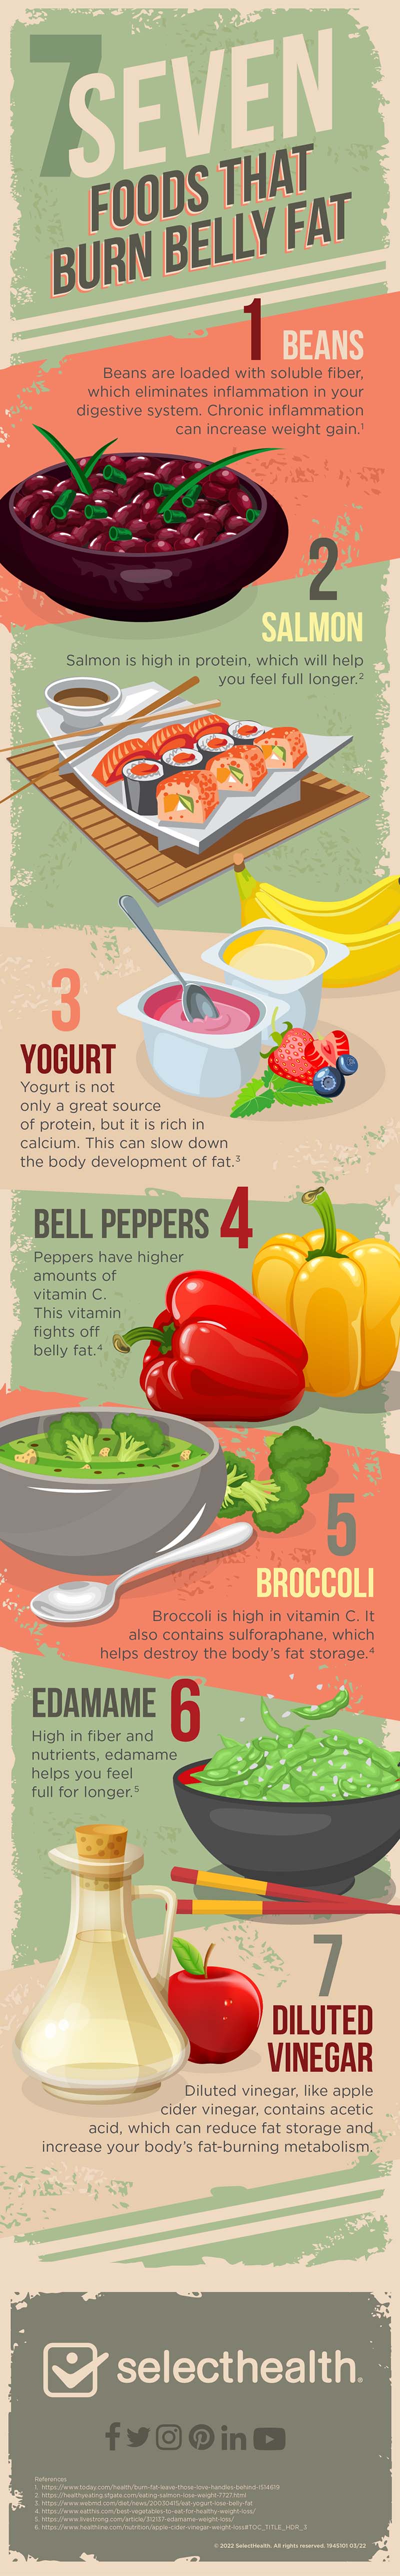 5 Foods That Burn Belly Fat